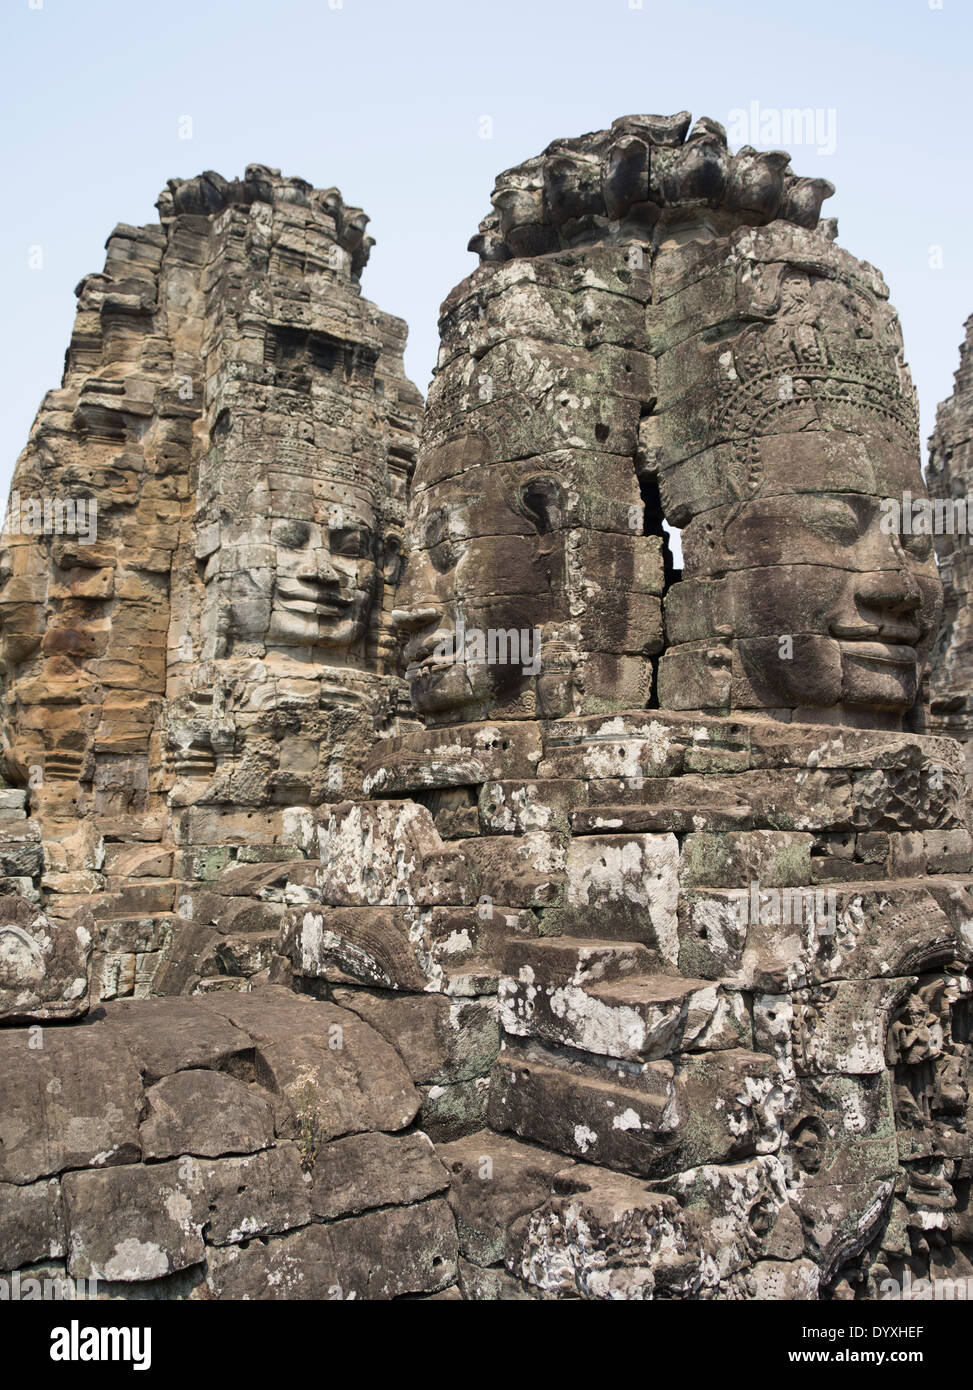 Towers with the smiling faces of Lokeshvara Bayon Temple within the walls of Angkor Thom, Siem Reap, Cambodia Stock Photo